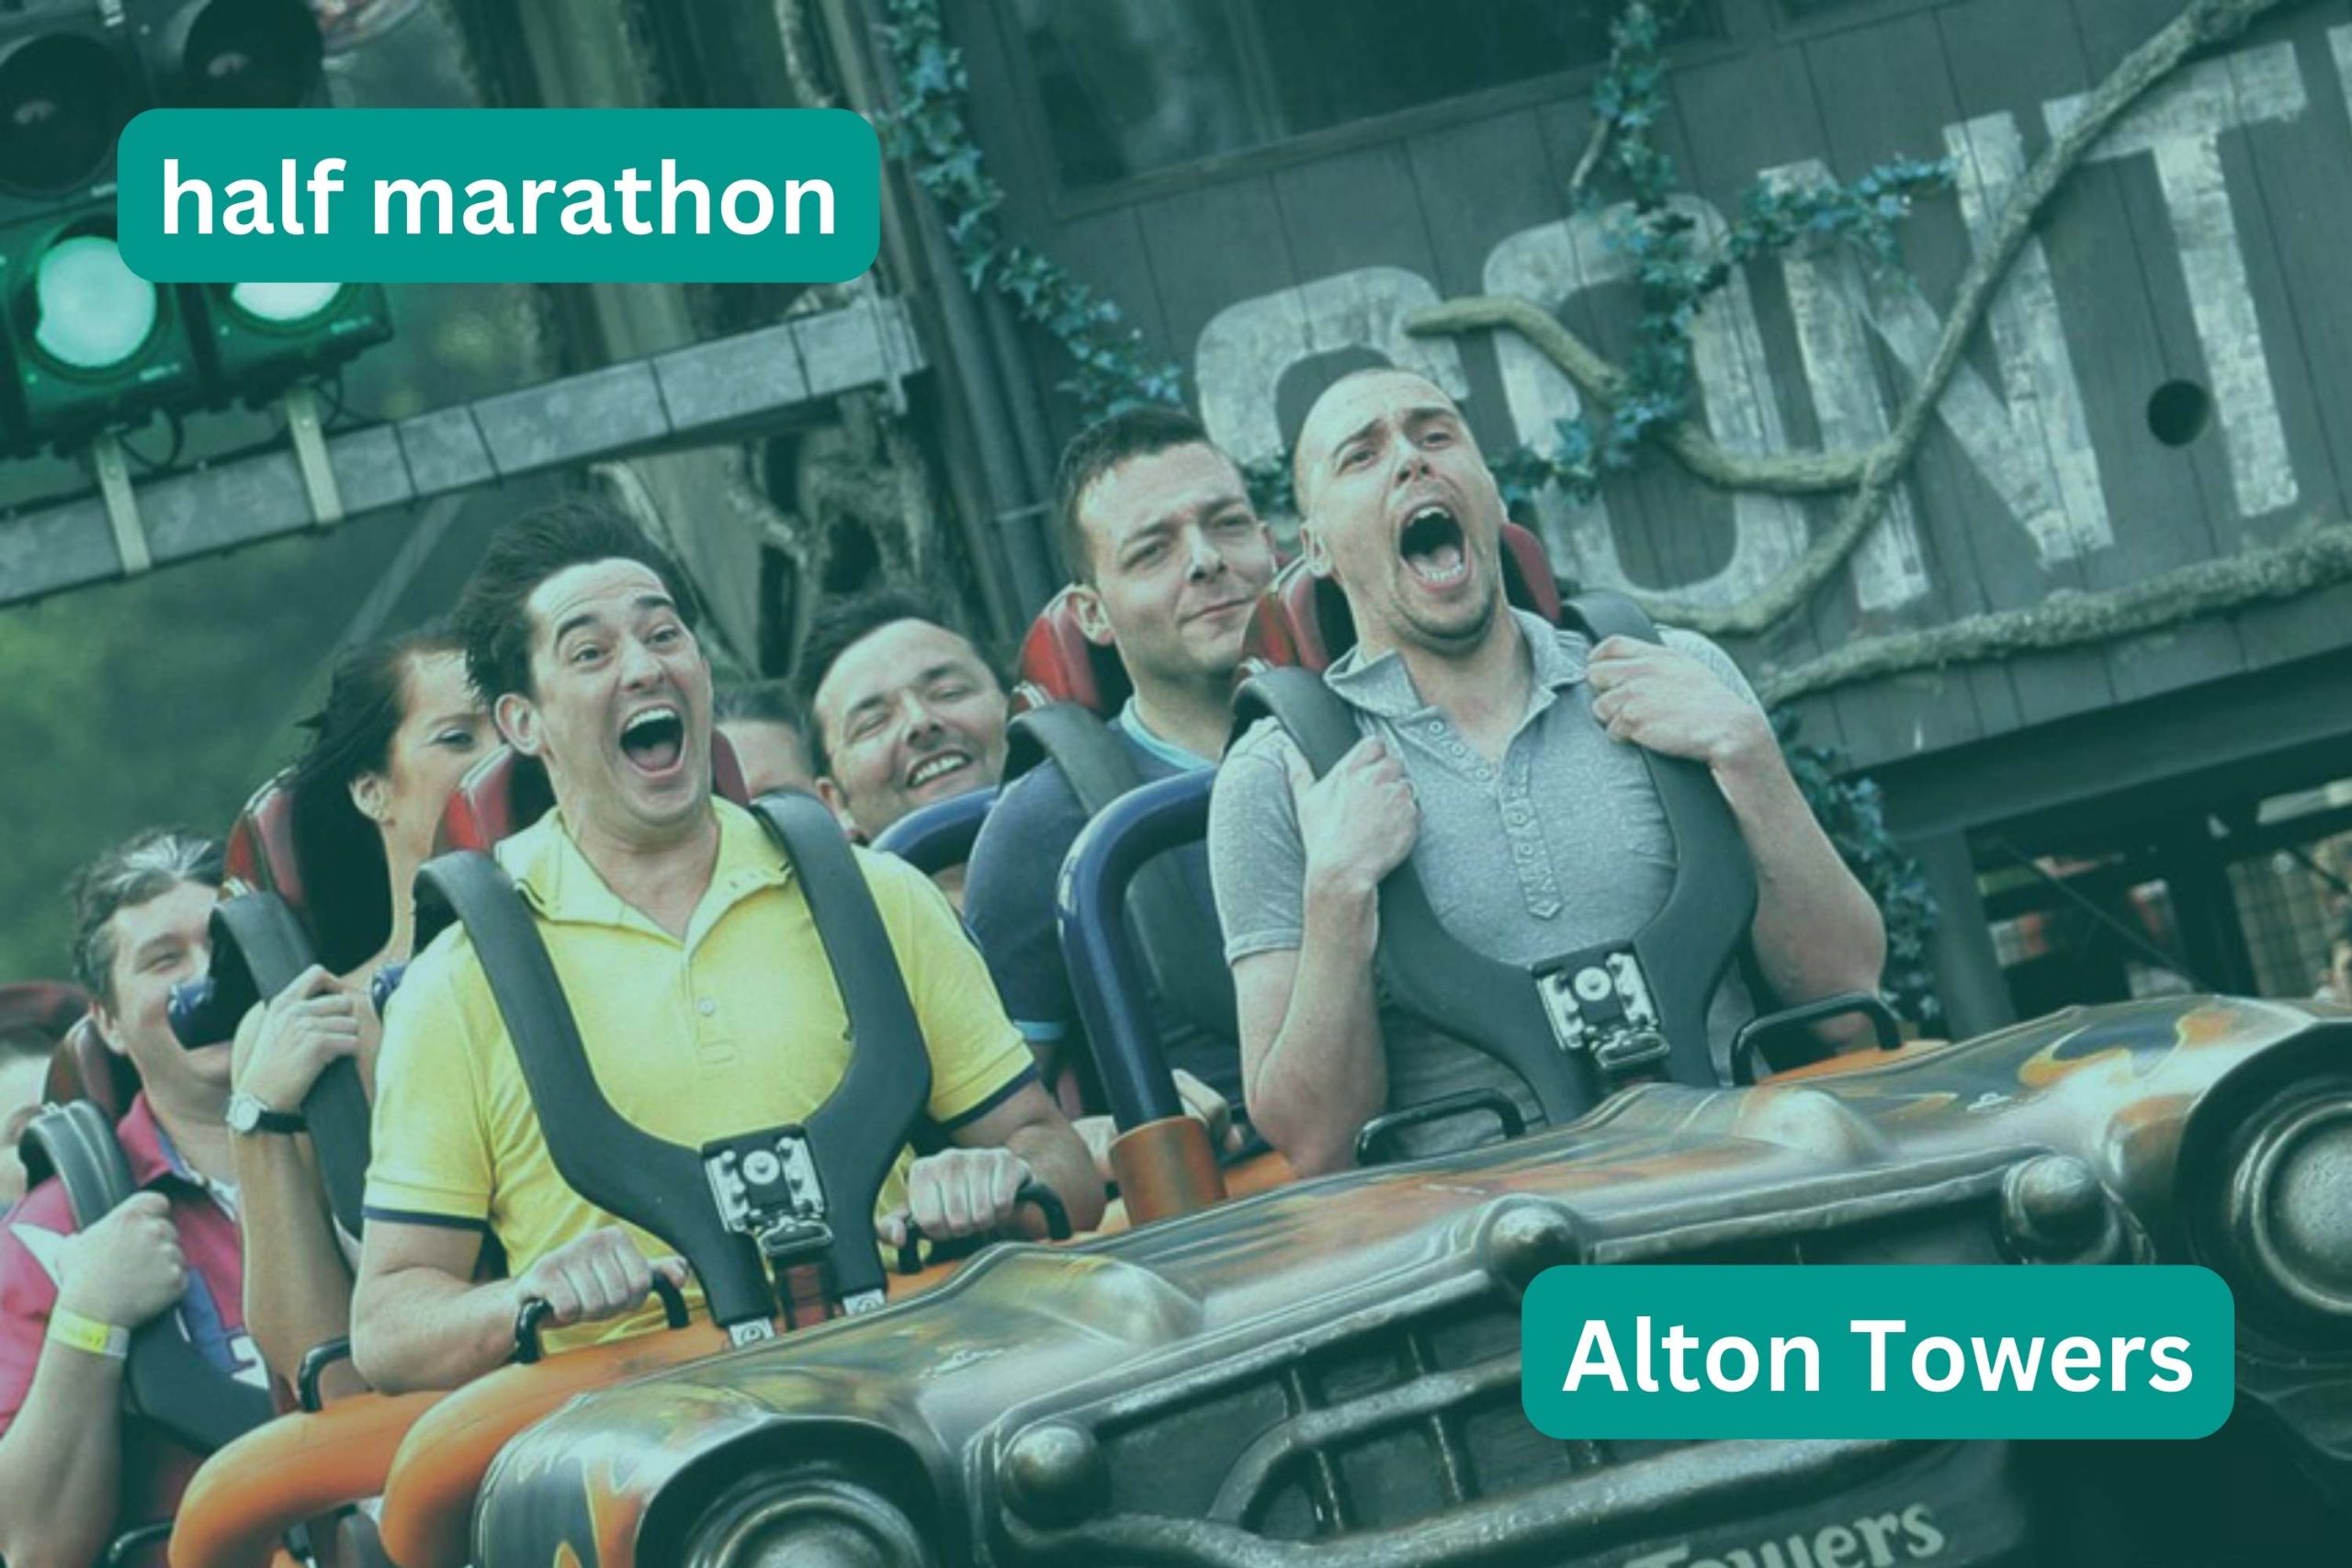 People on roller coaster in Alton Towers. Title text half maraton, Alton Towers